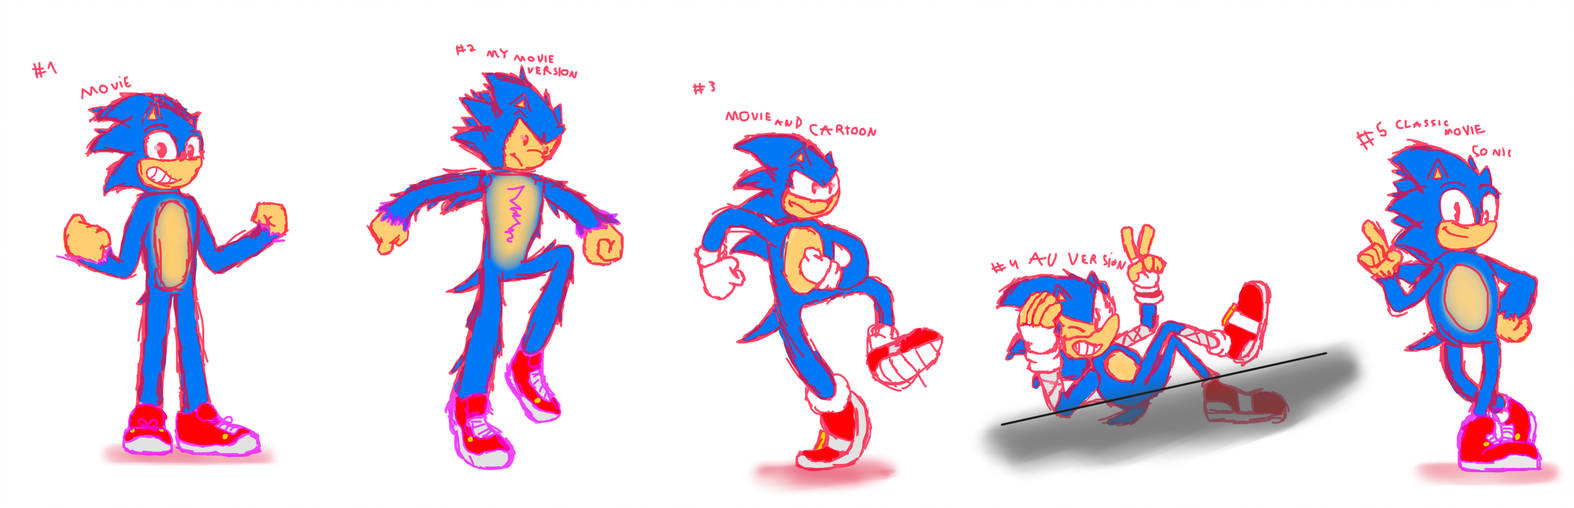 Sonic Movie Design And Alt Designs By Pauloddd2005 On